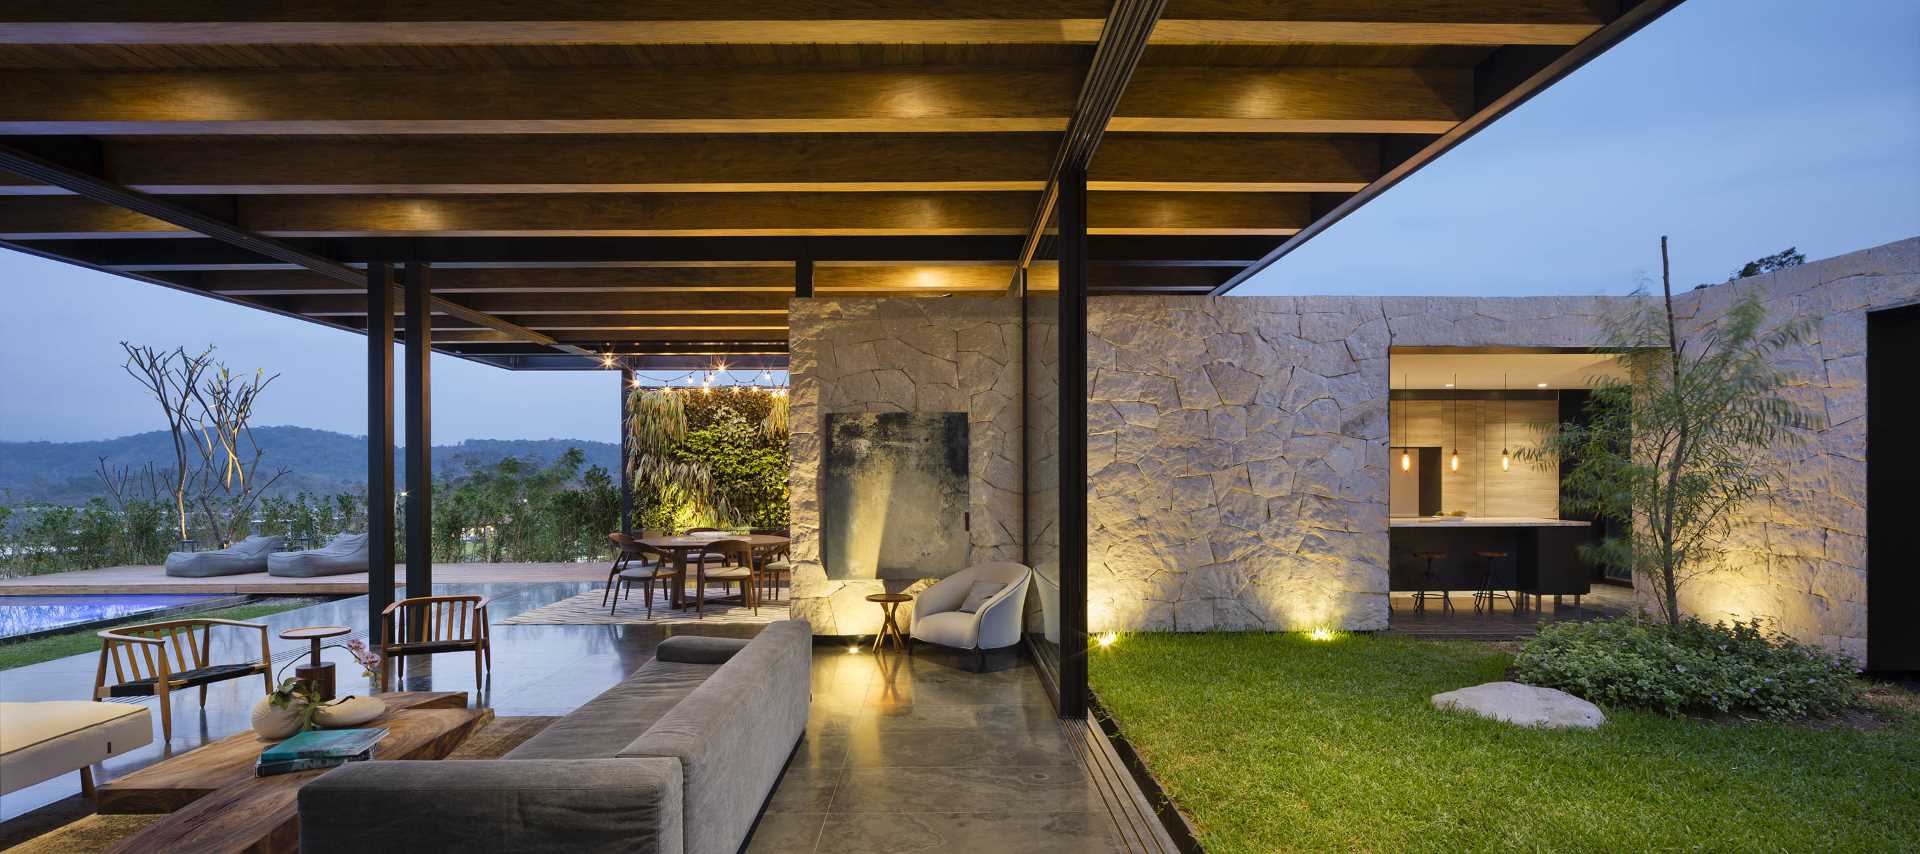 A modern living room with exposed structural elements, that opens to the outdoors and swimming pool.